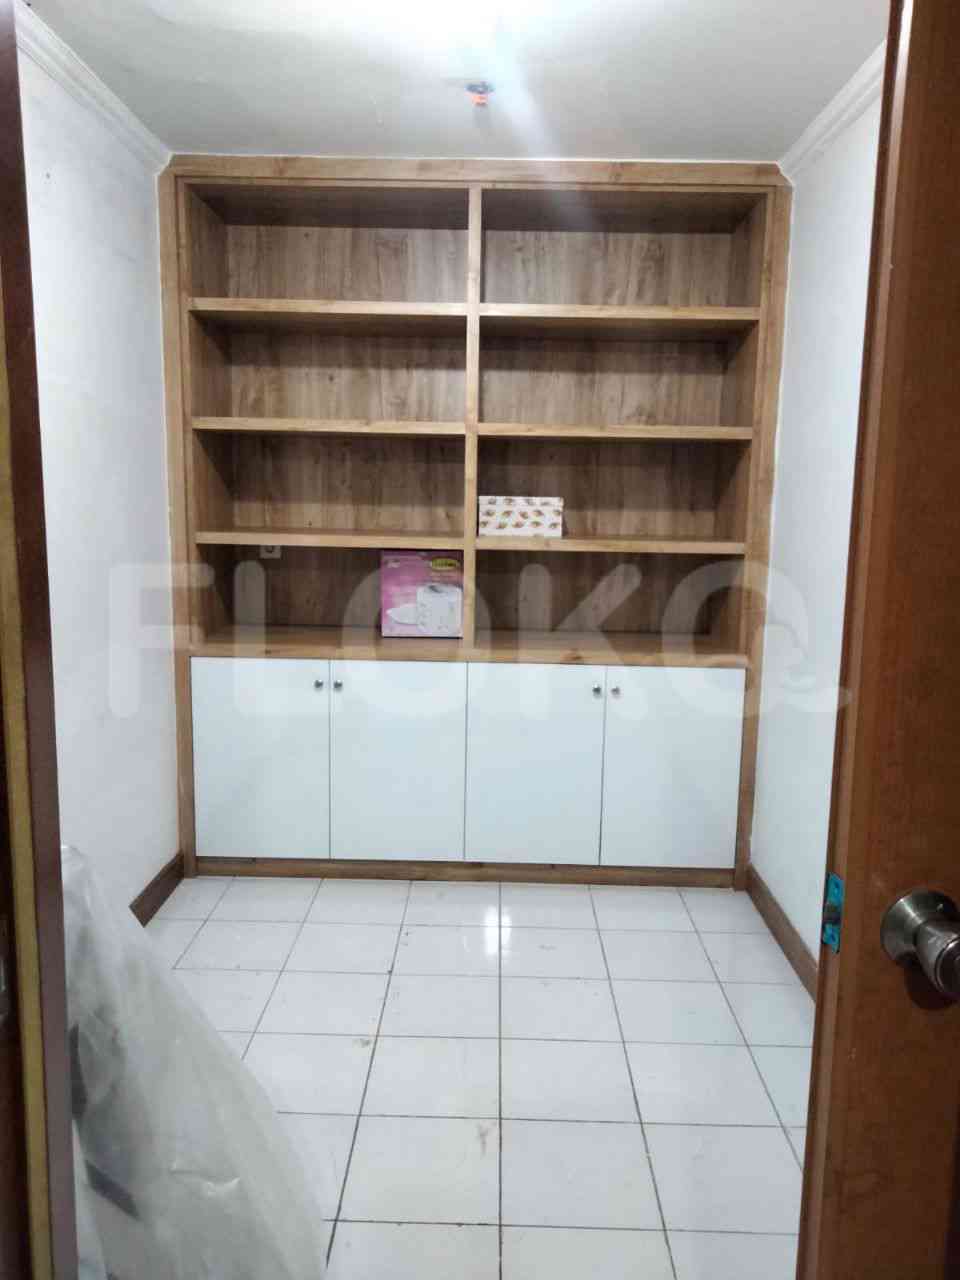 4 Bedroom on 12th Floor for Rent in Grand Palace Kemayoran - fke369 3